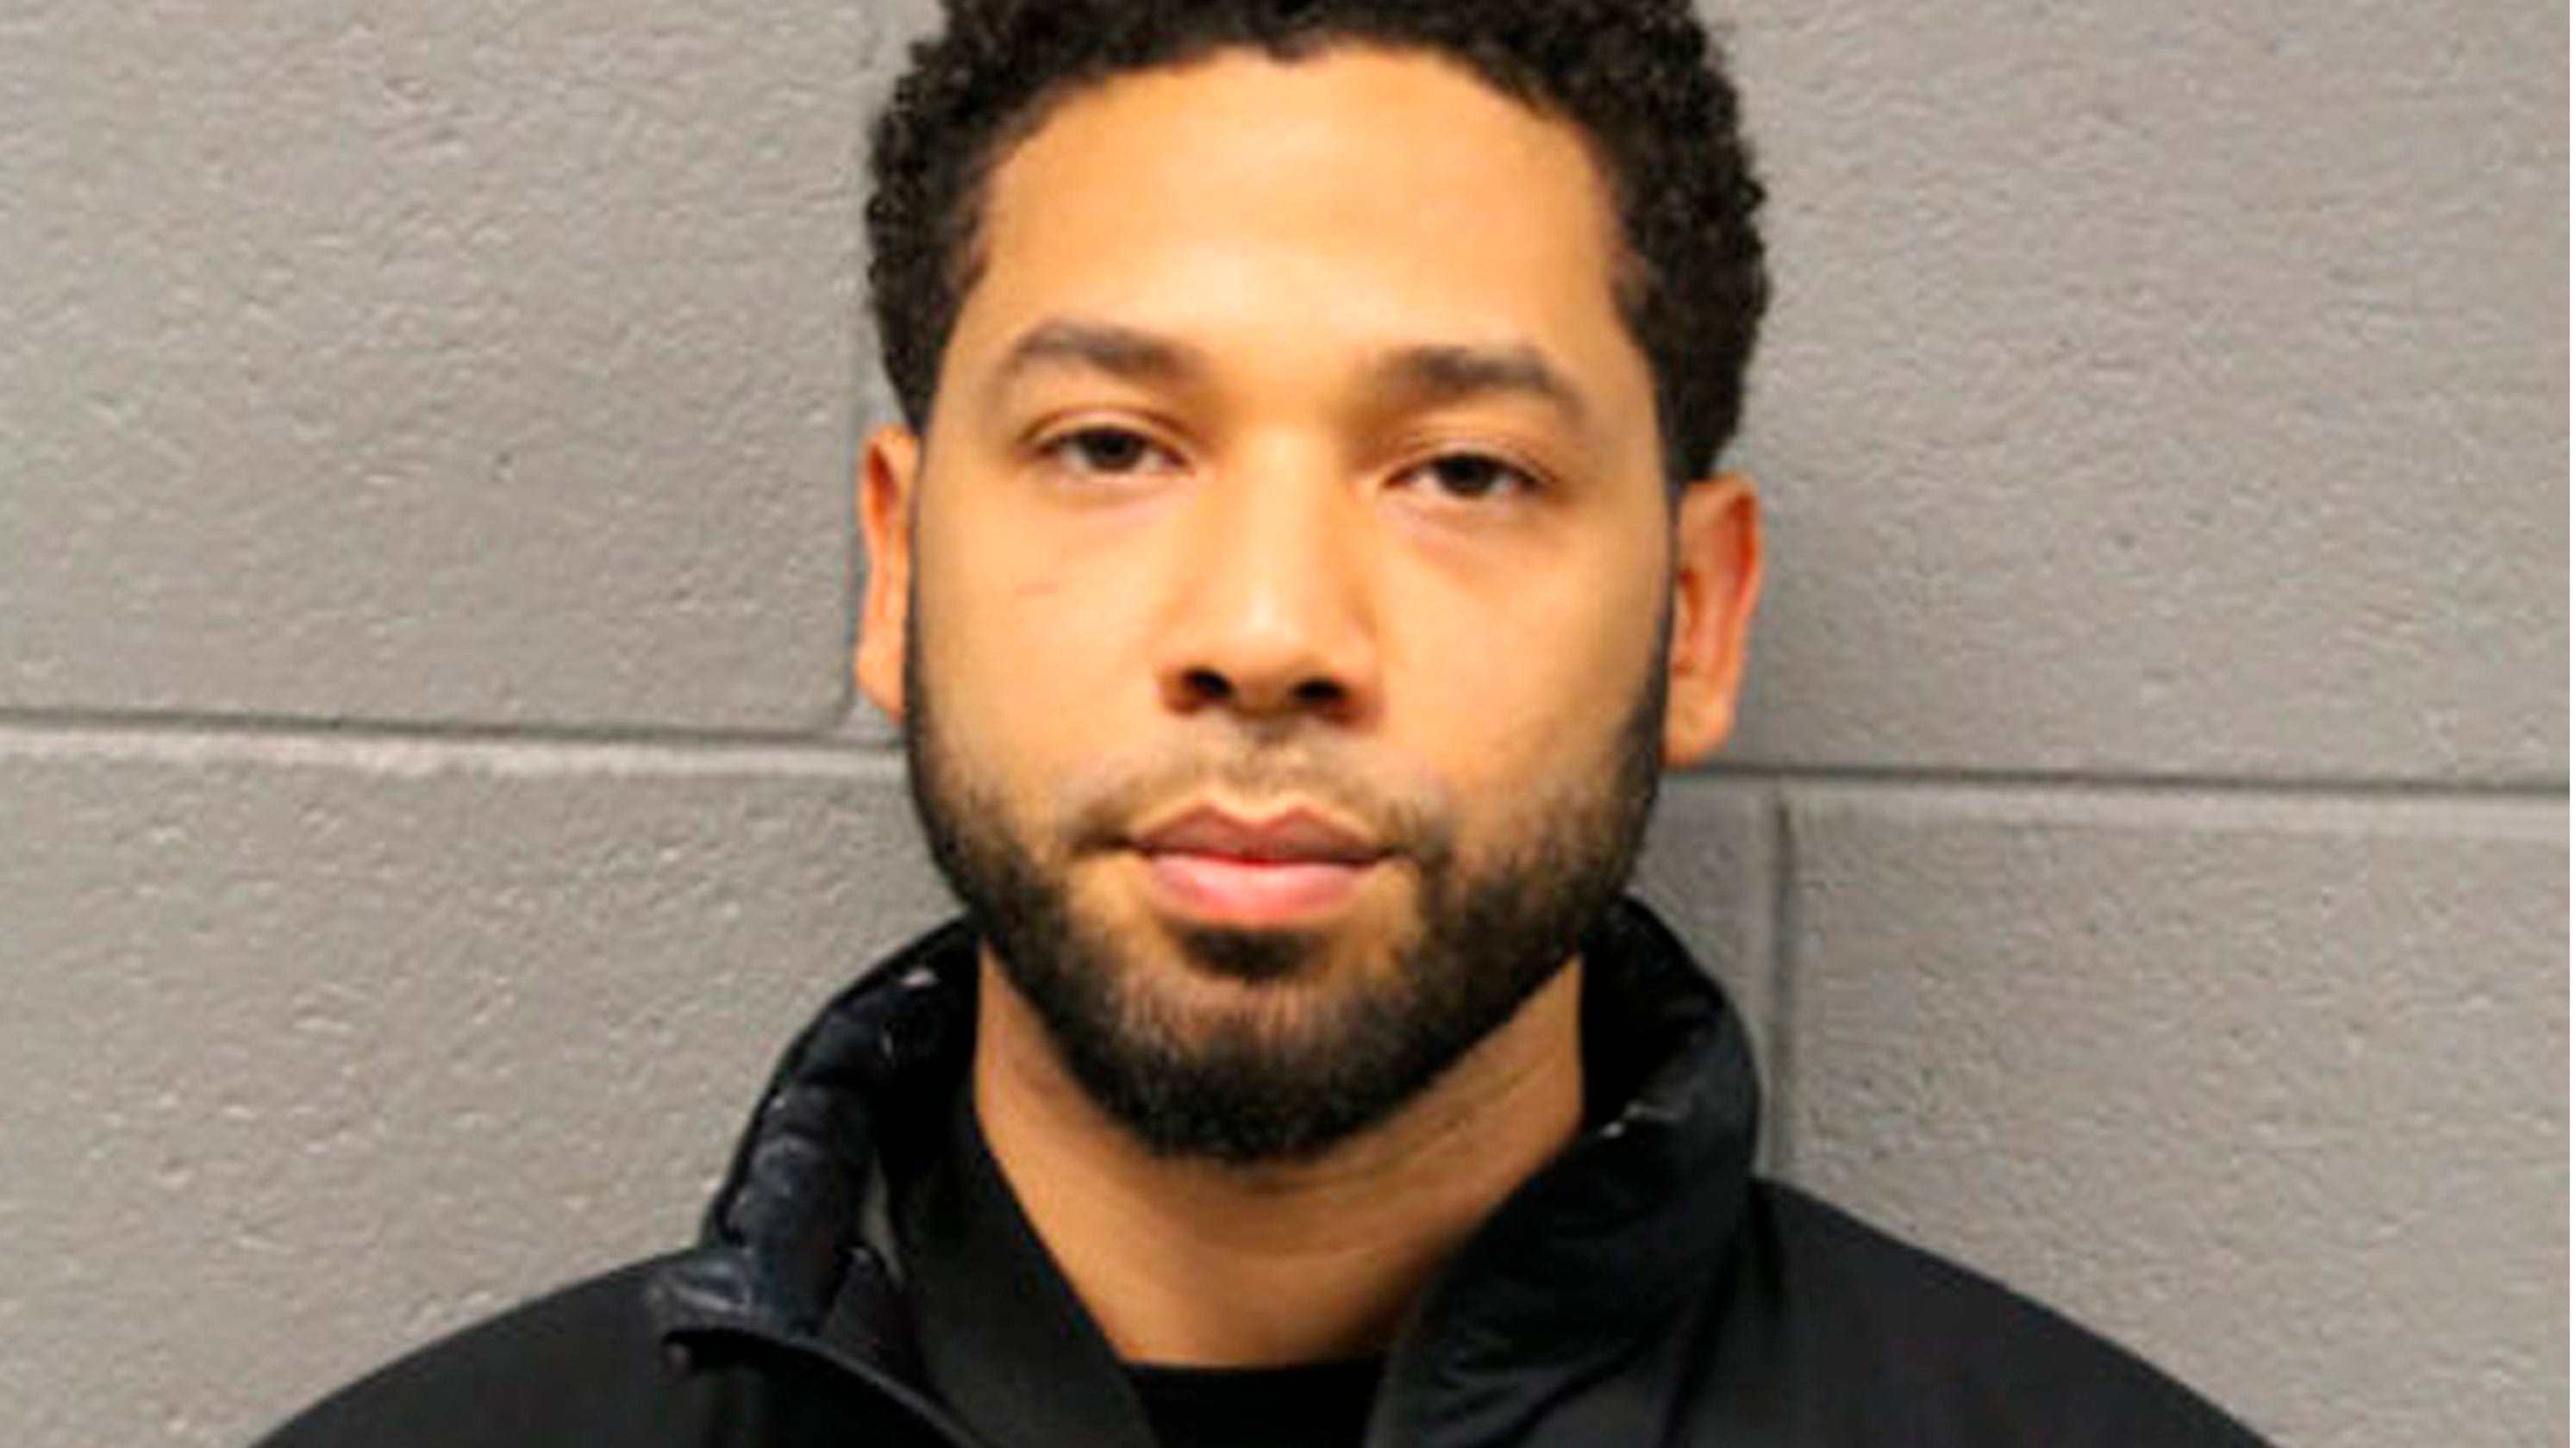 Jussie Smollett attack may be fake, but hate violence is rising2988 x 1680